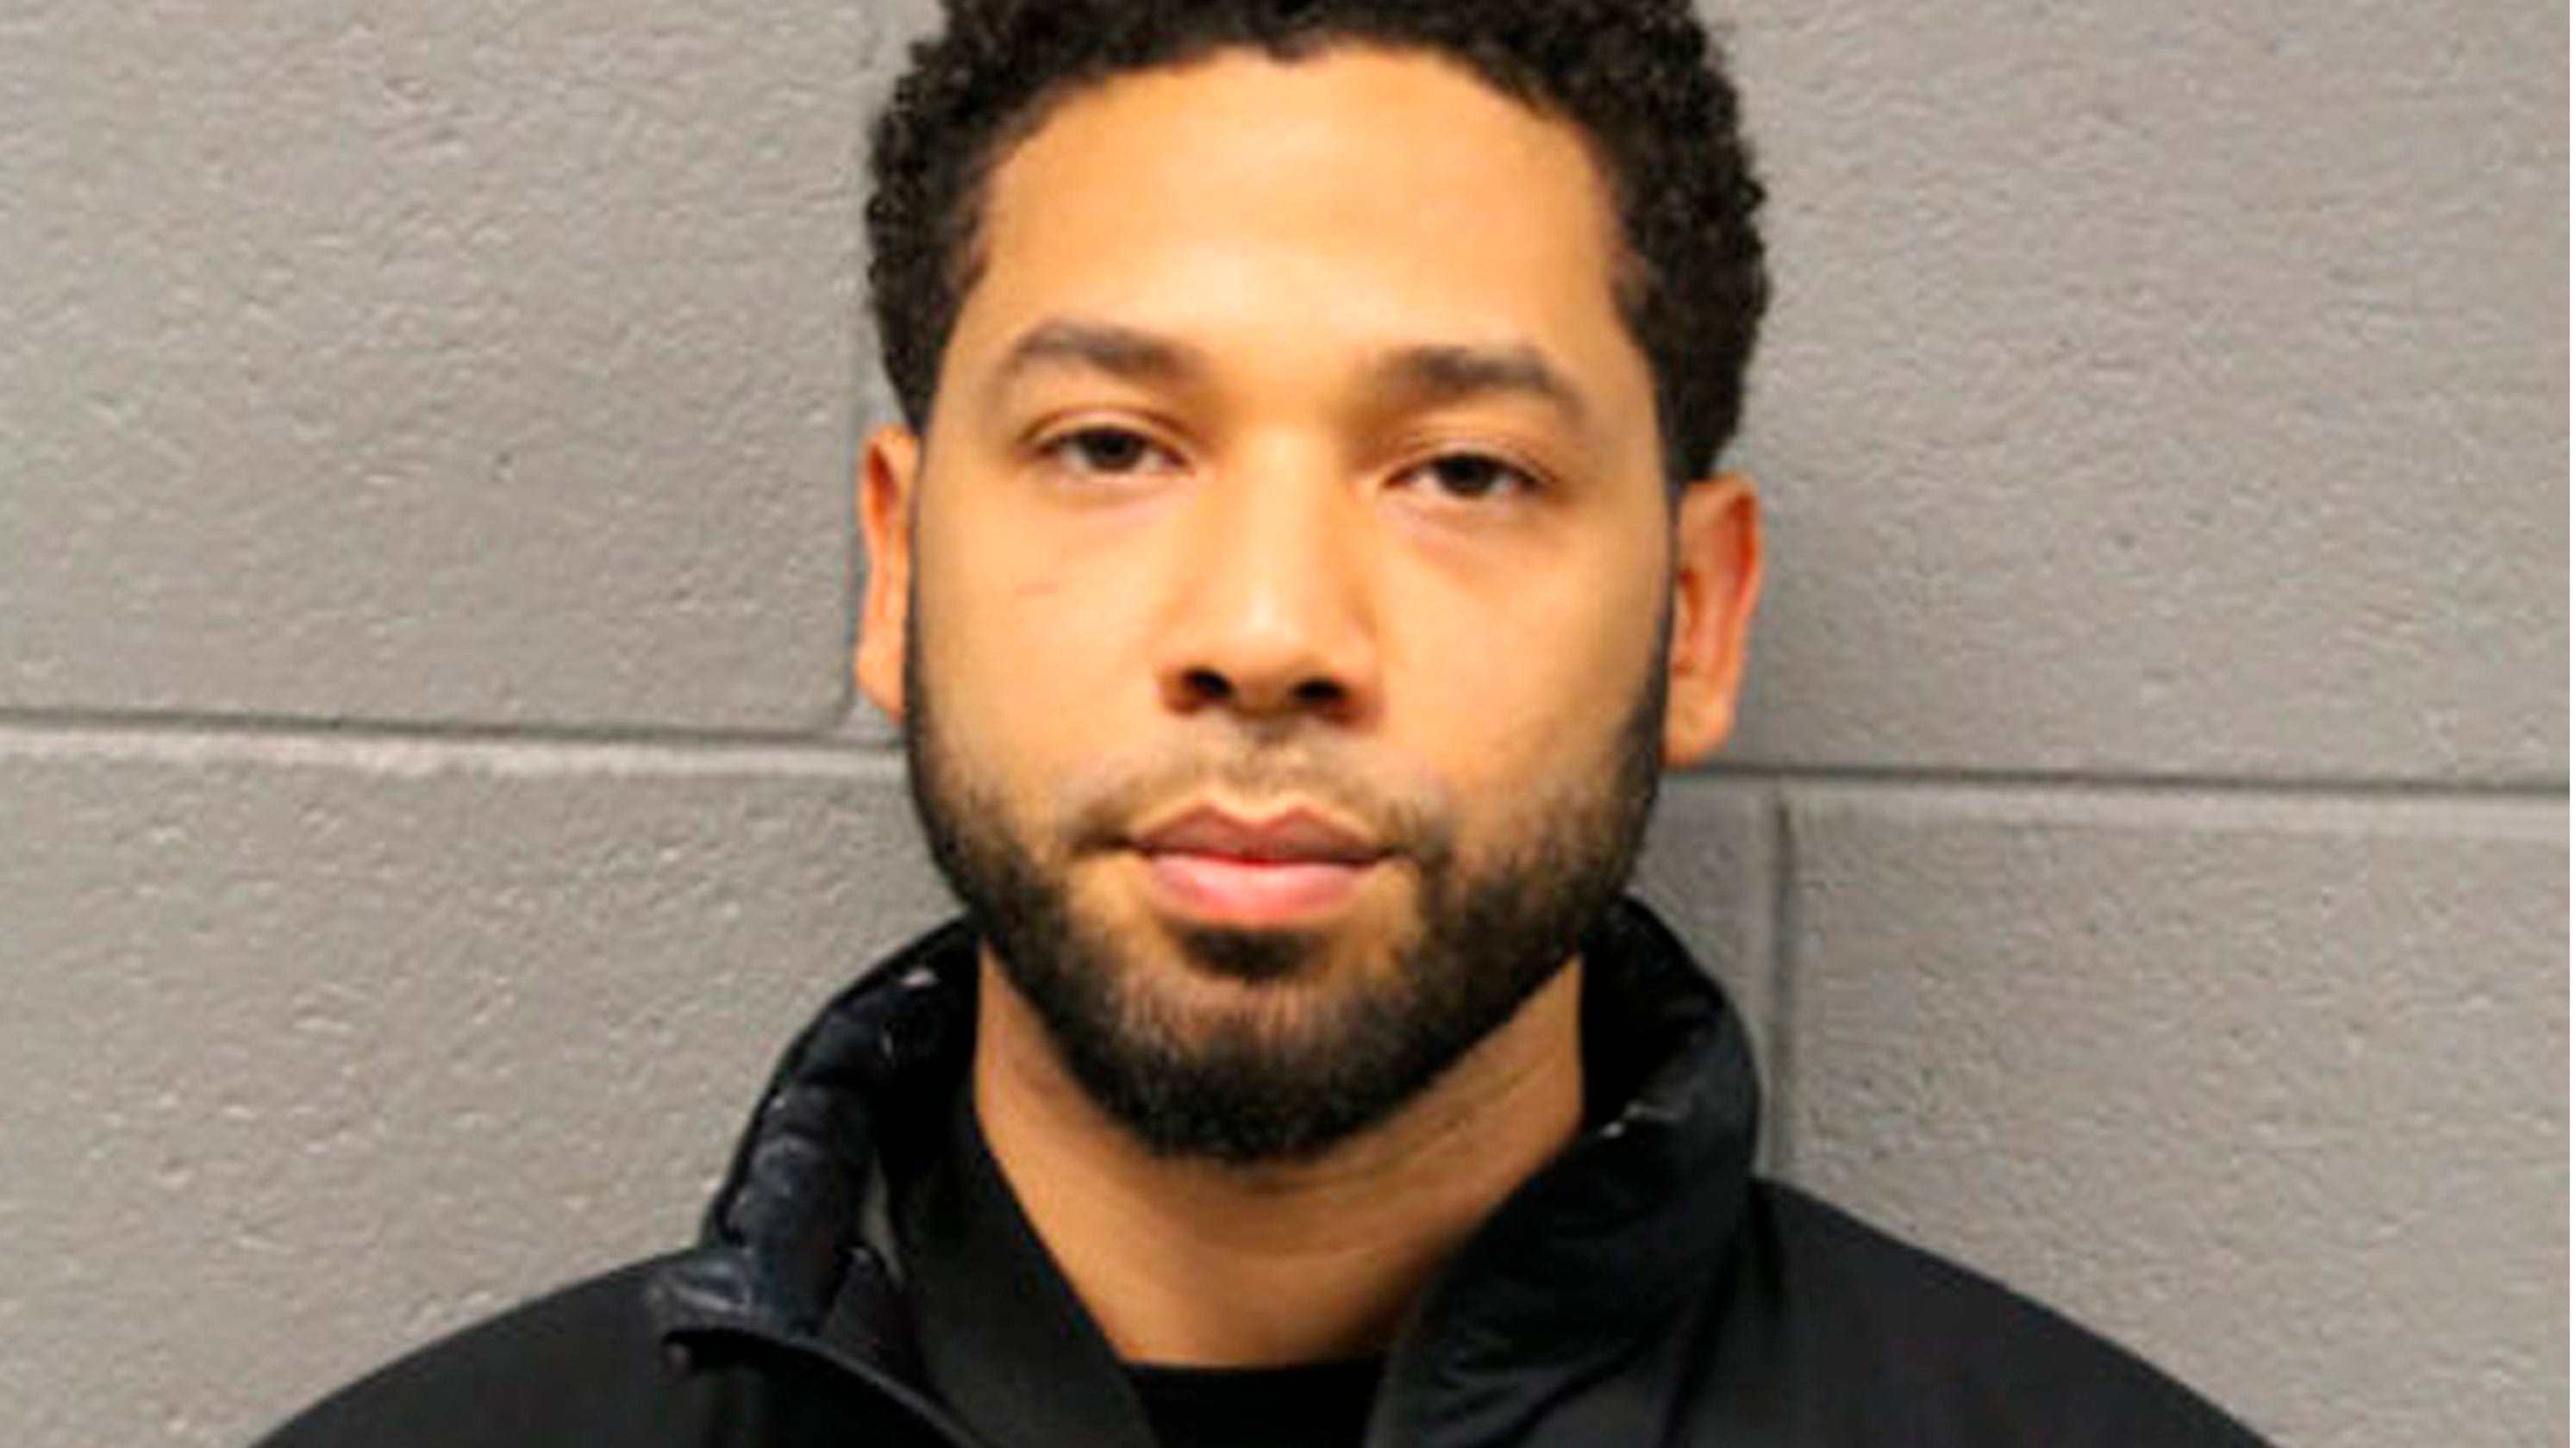 Jussie Smollett attack may be fake, but hate violence is rising2988 x 1680